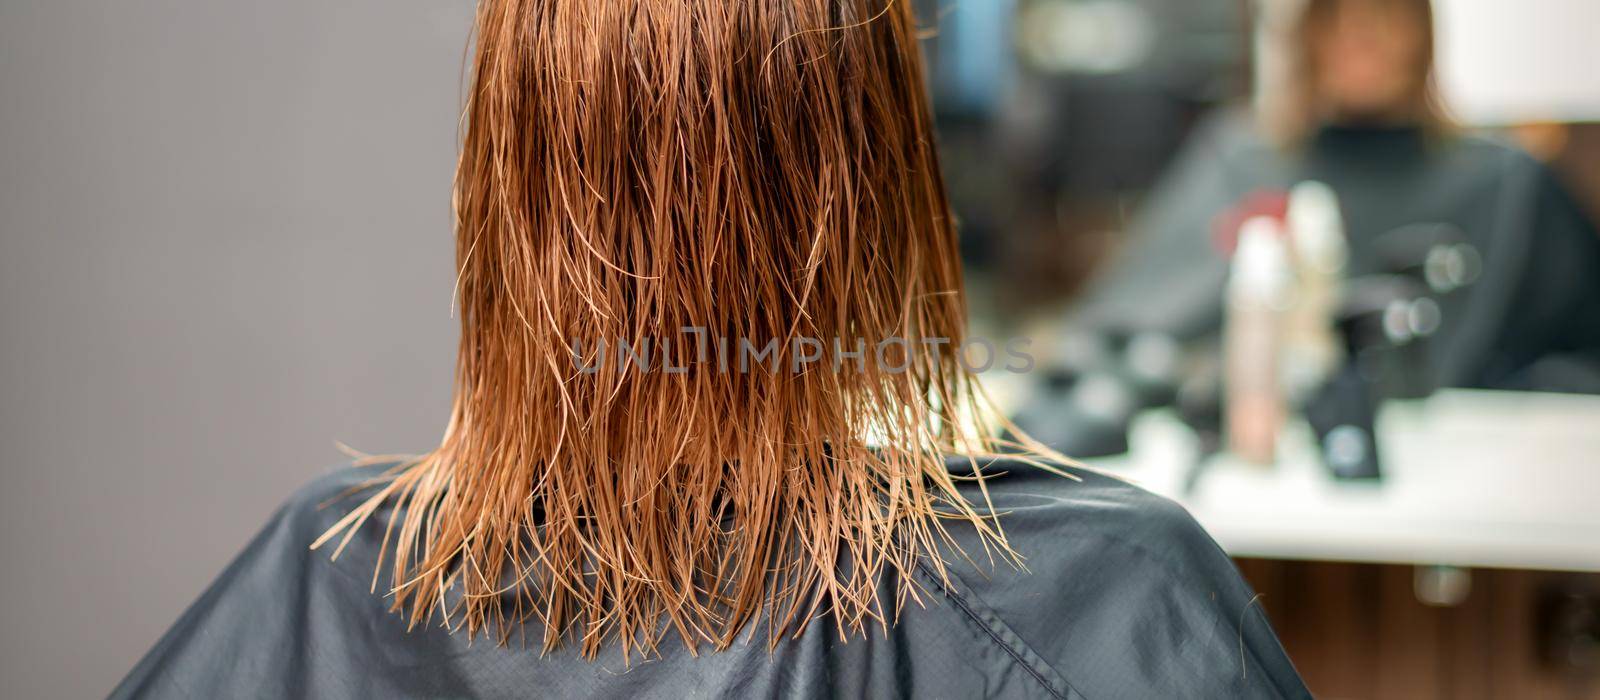 Back view of beautiful wet long red straight hair of young woman in hair salon